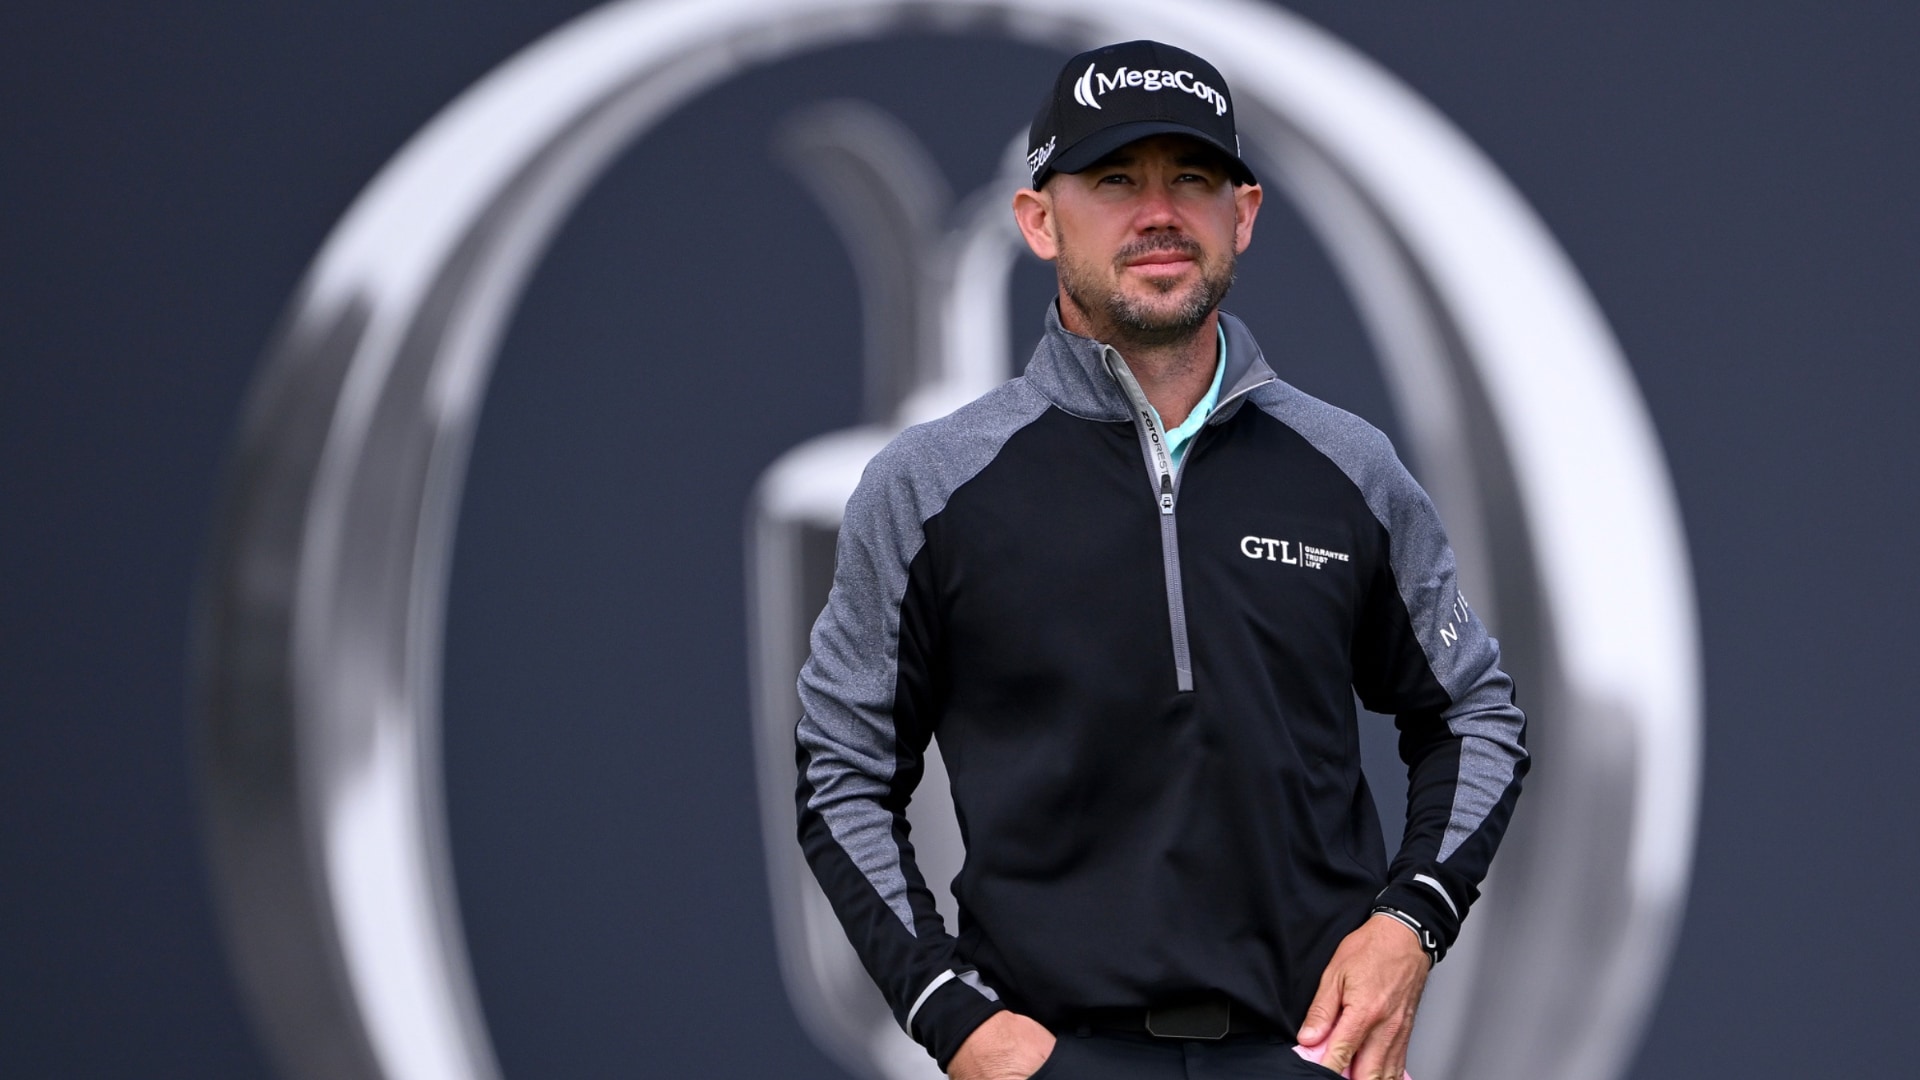 2023 British Open: A year after competitive epiphany, Brian Harman in hunt for more